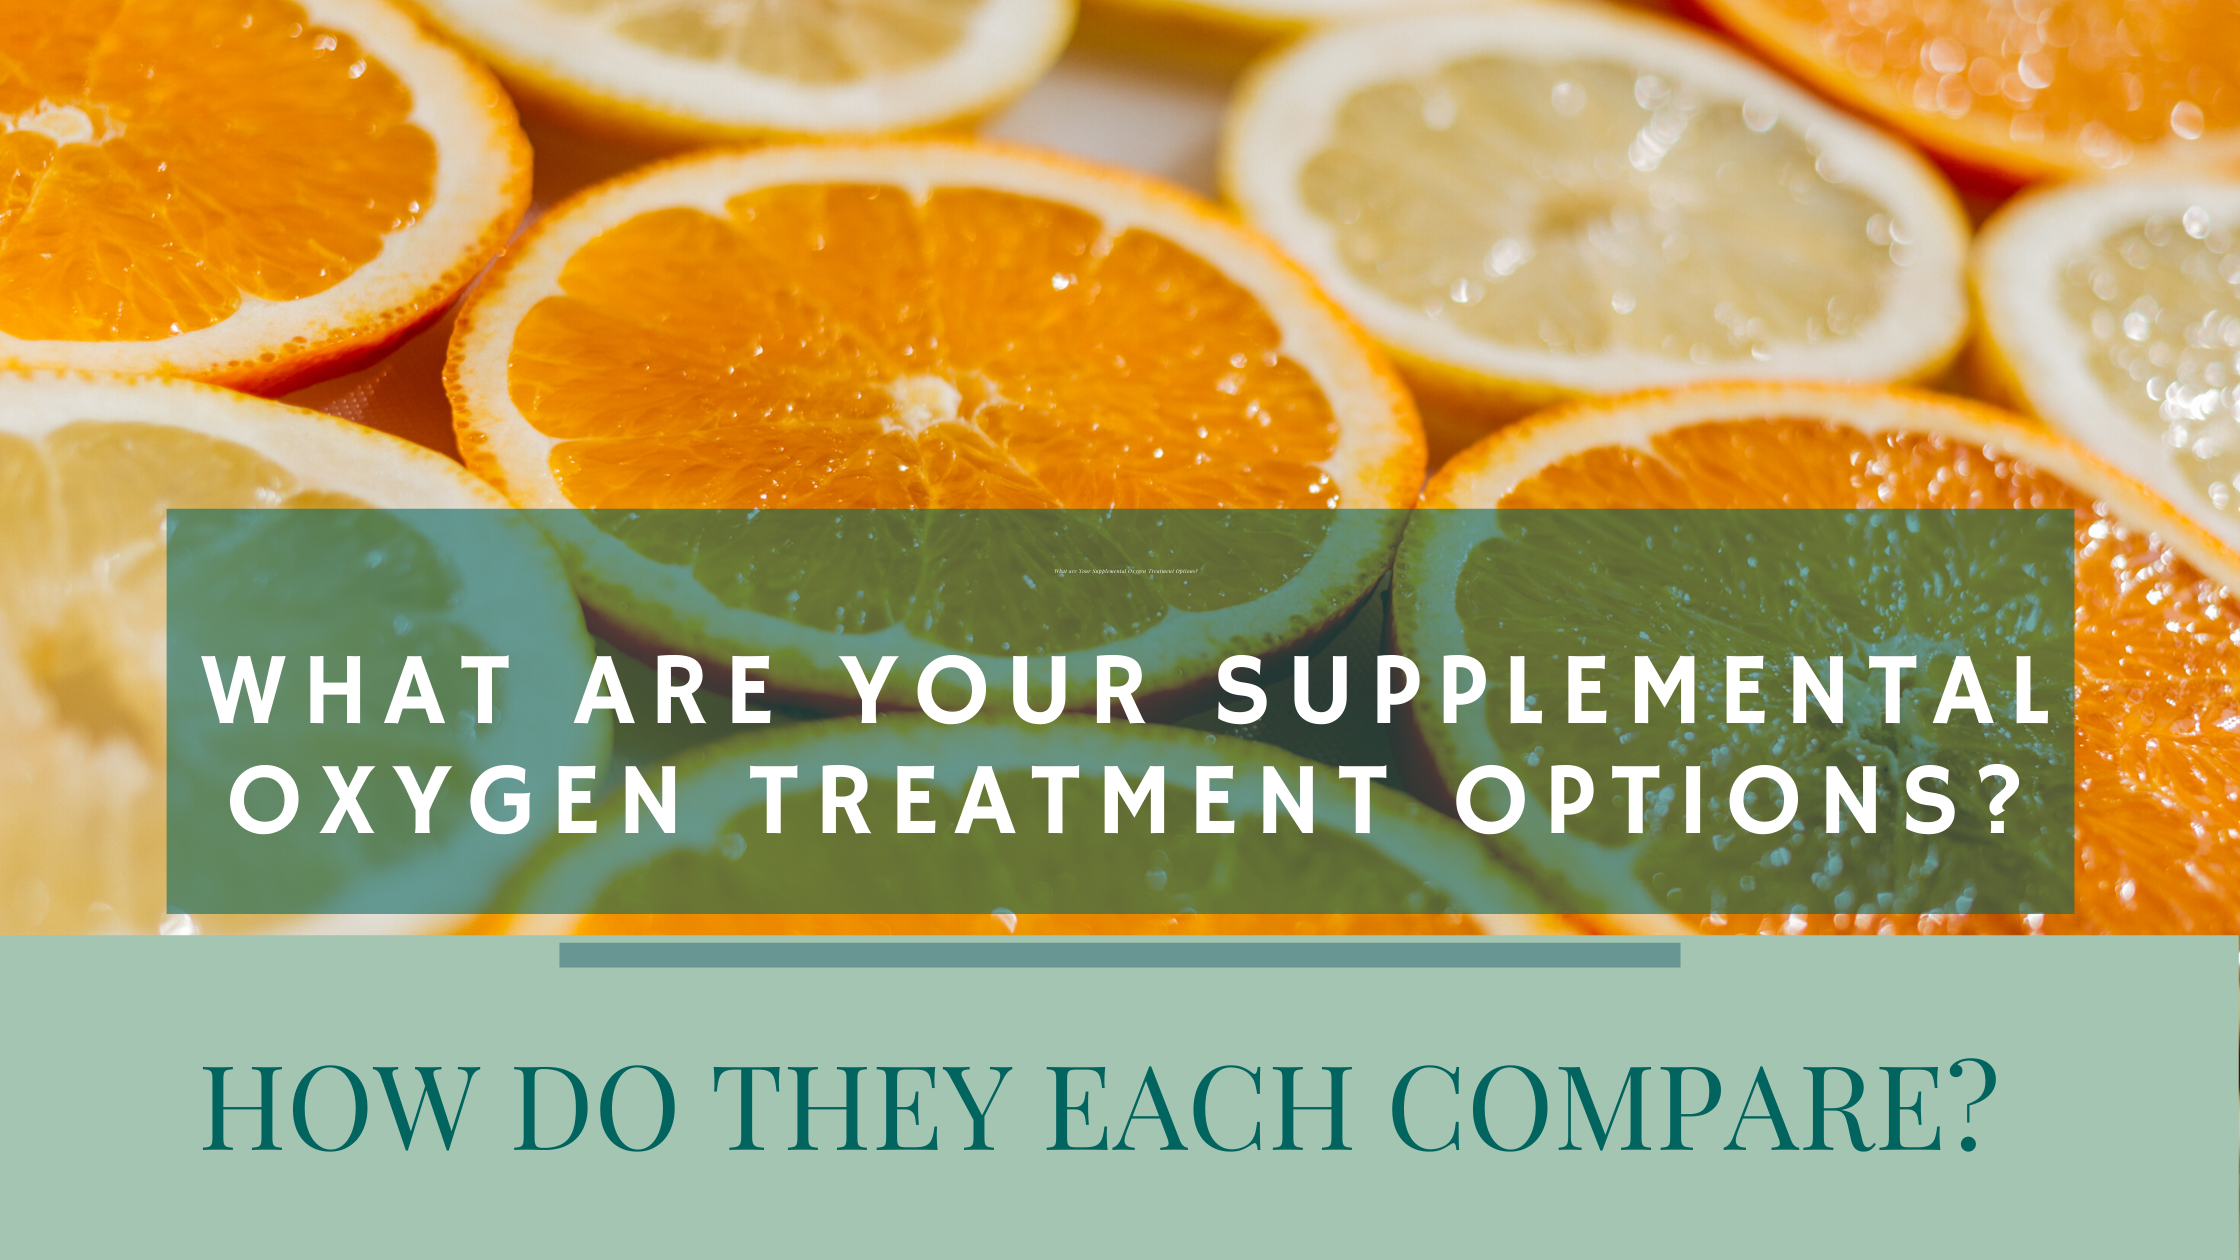 What are Your Supplemental Oxygen Treatment Options?